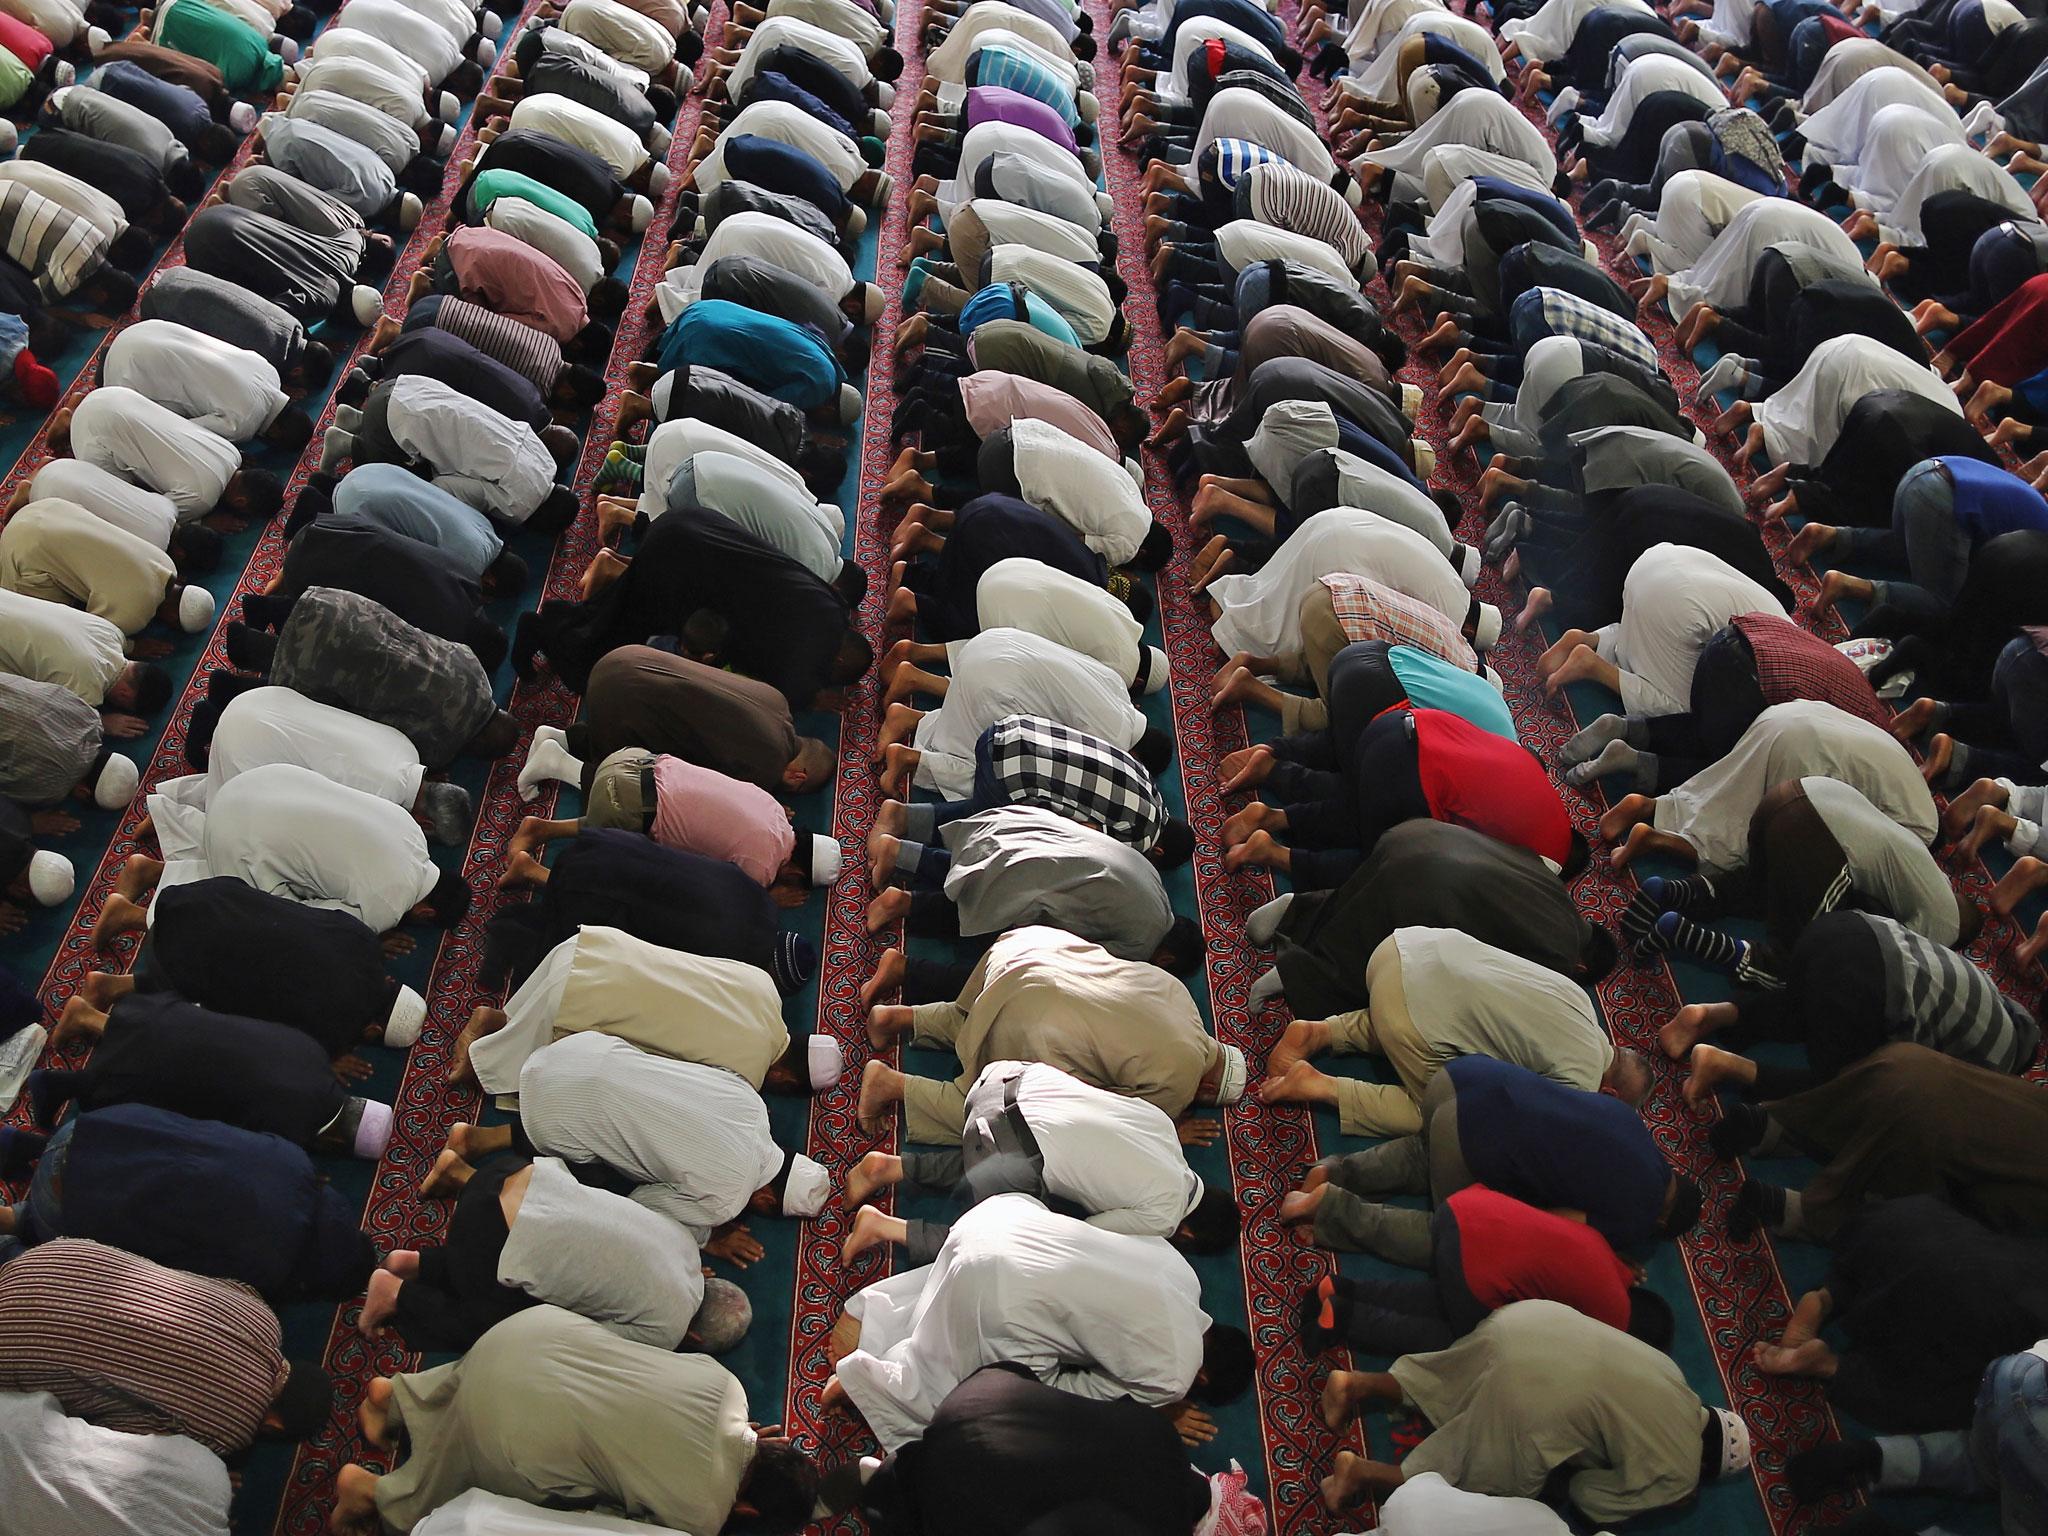 In this file image, Muslim men pray during Eid celebrations on August 7th 2013